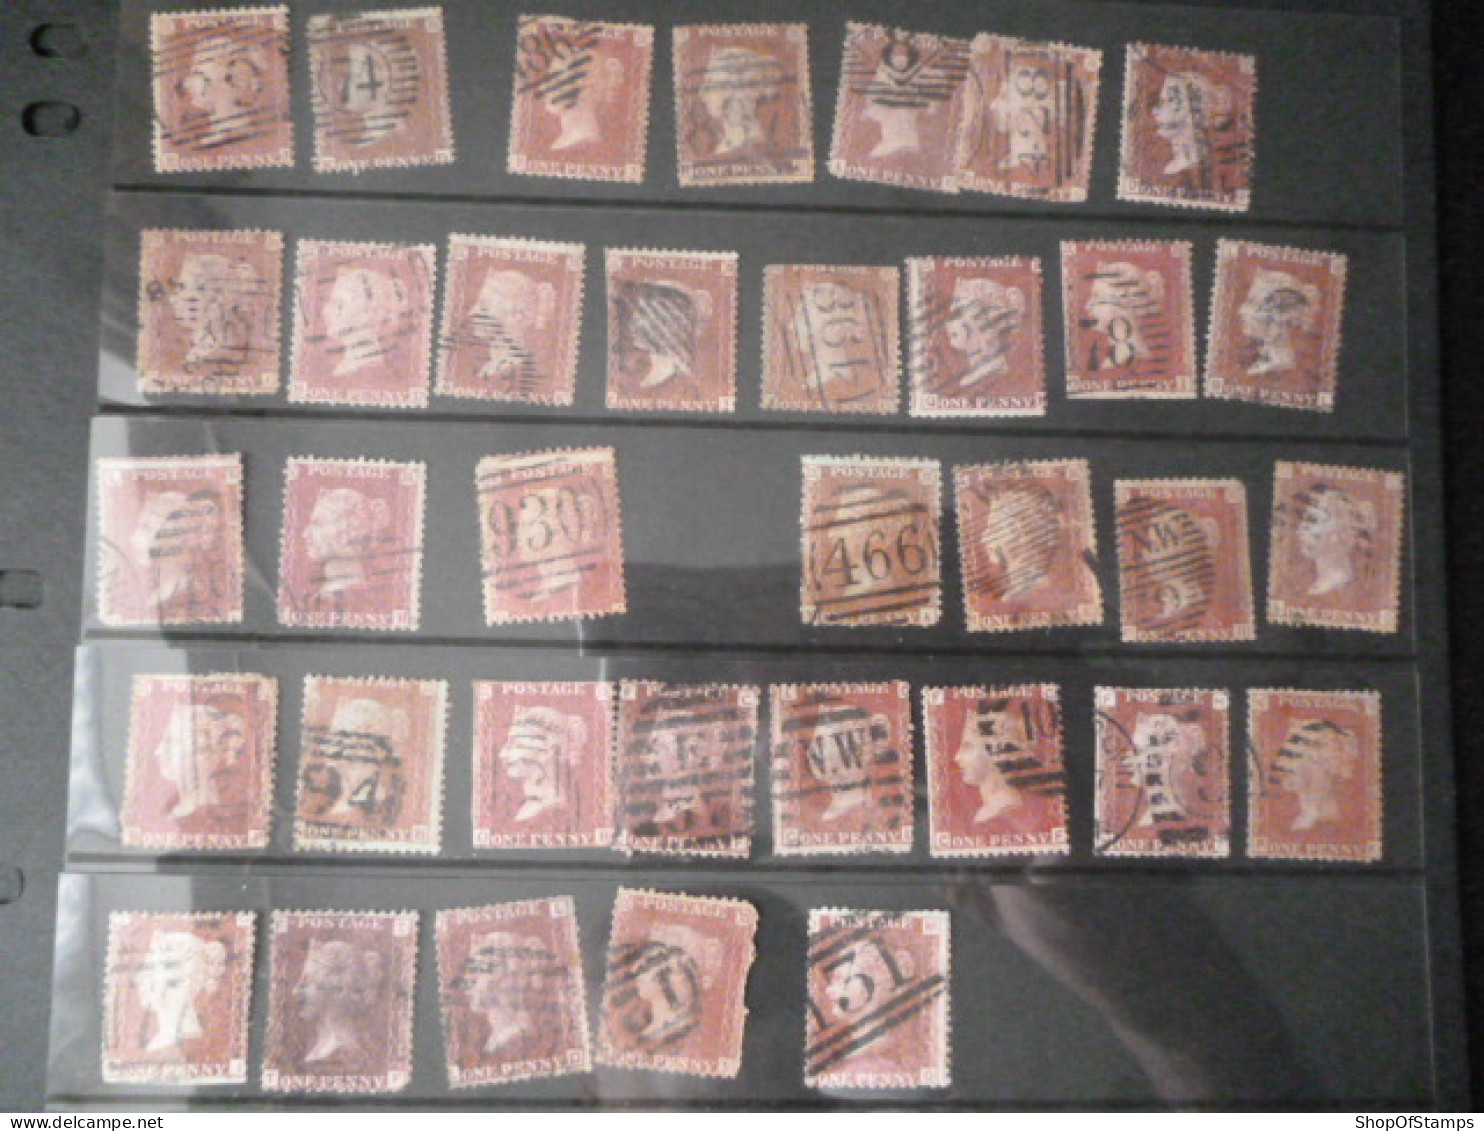 GREAT BRITAIN SG RED PENNY IMPERF Only 1 STAMP [ SELECT ONE AND MENTION ROW AND Stamp L To R] - ....-1951 Pre Elizabeth II